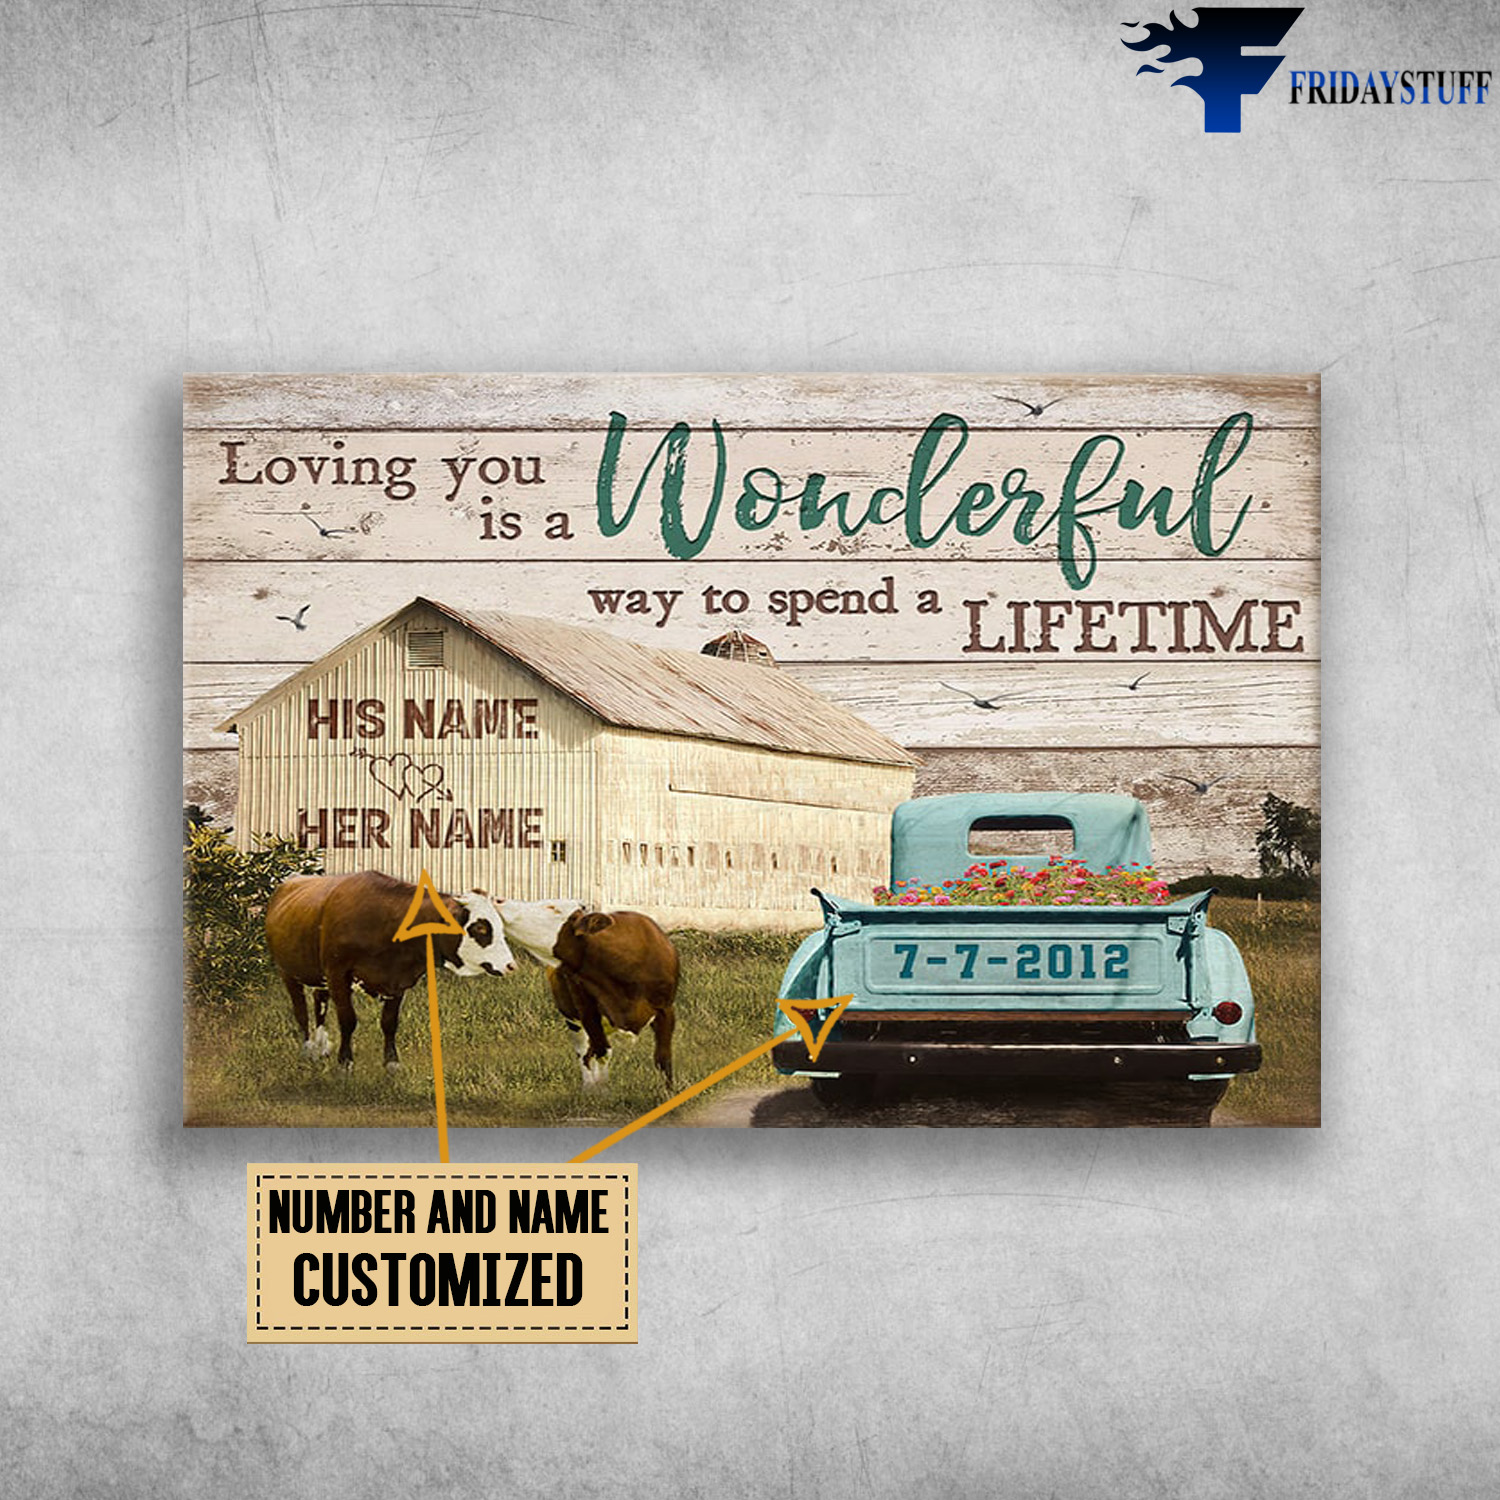 Barn and Truck, Couple Kissing Cows, Loving you is a wonderful way, to spend a lifetime, Gift for couple Farm, Farmer, Farmhouse Wall Art Decor